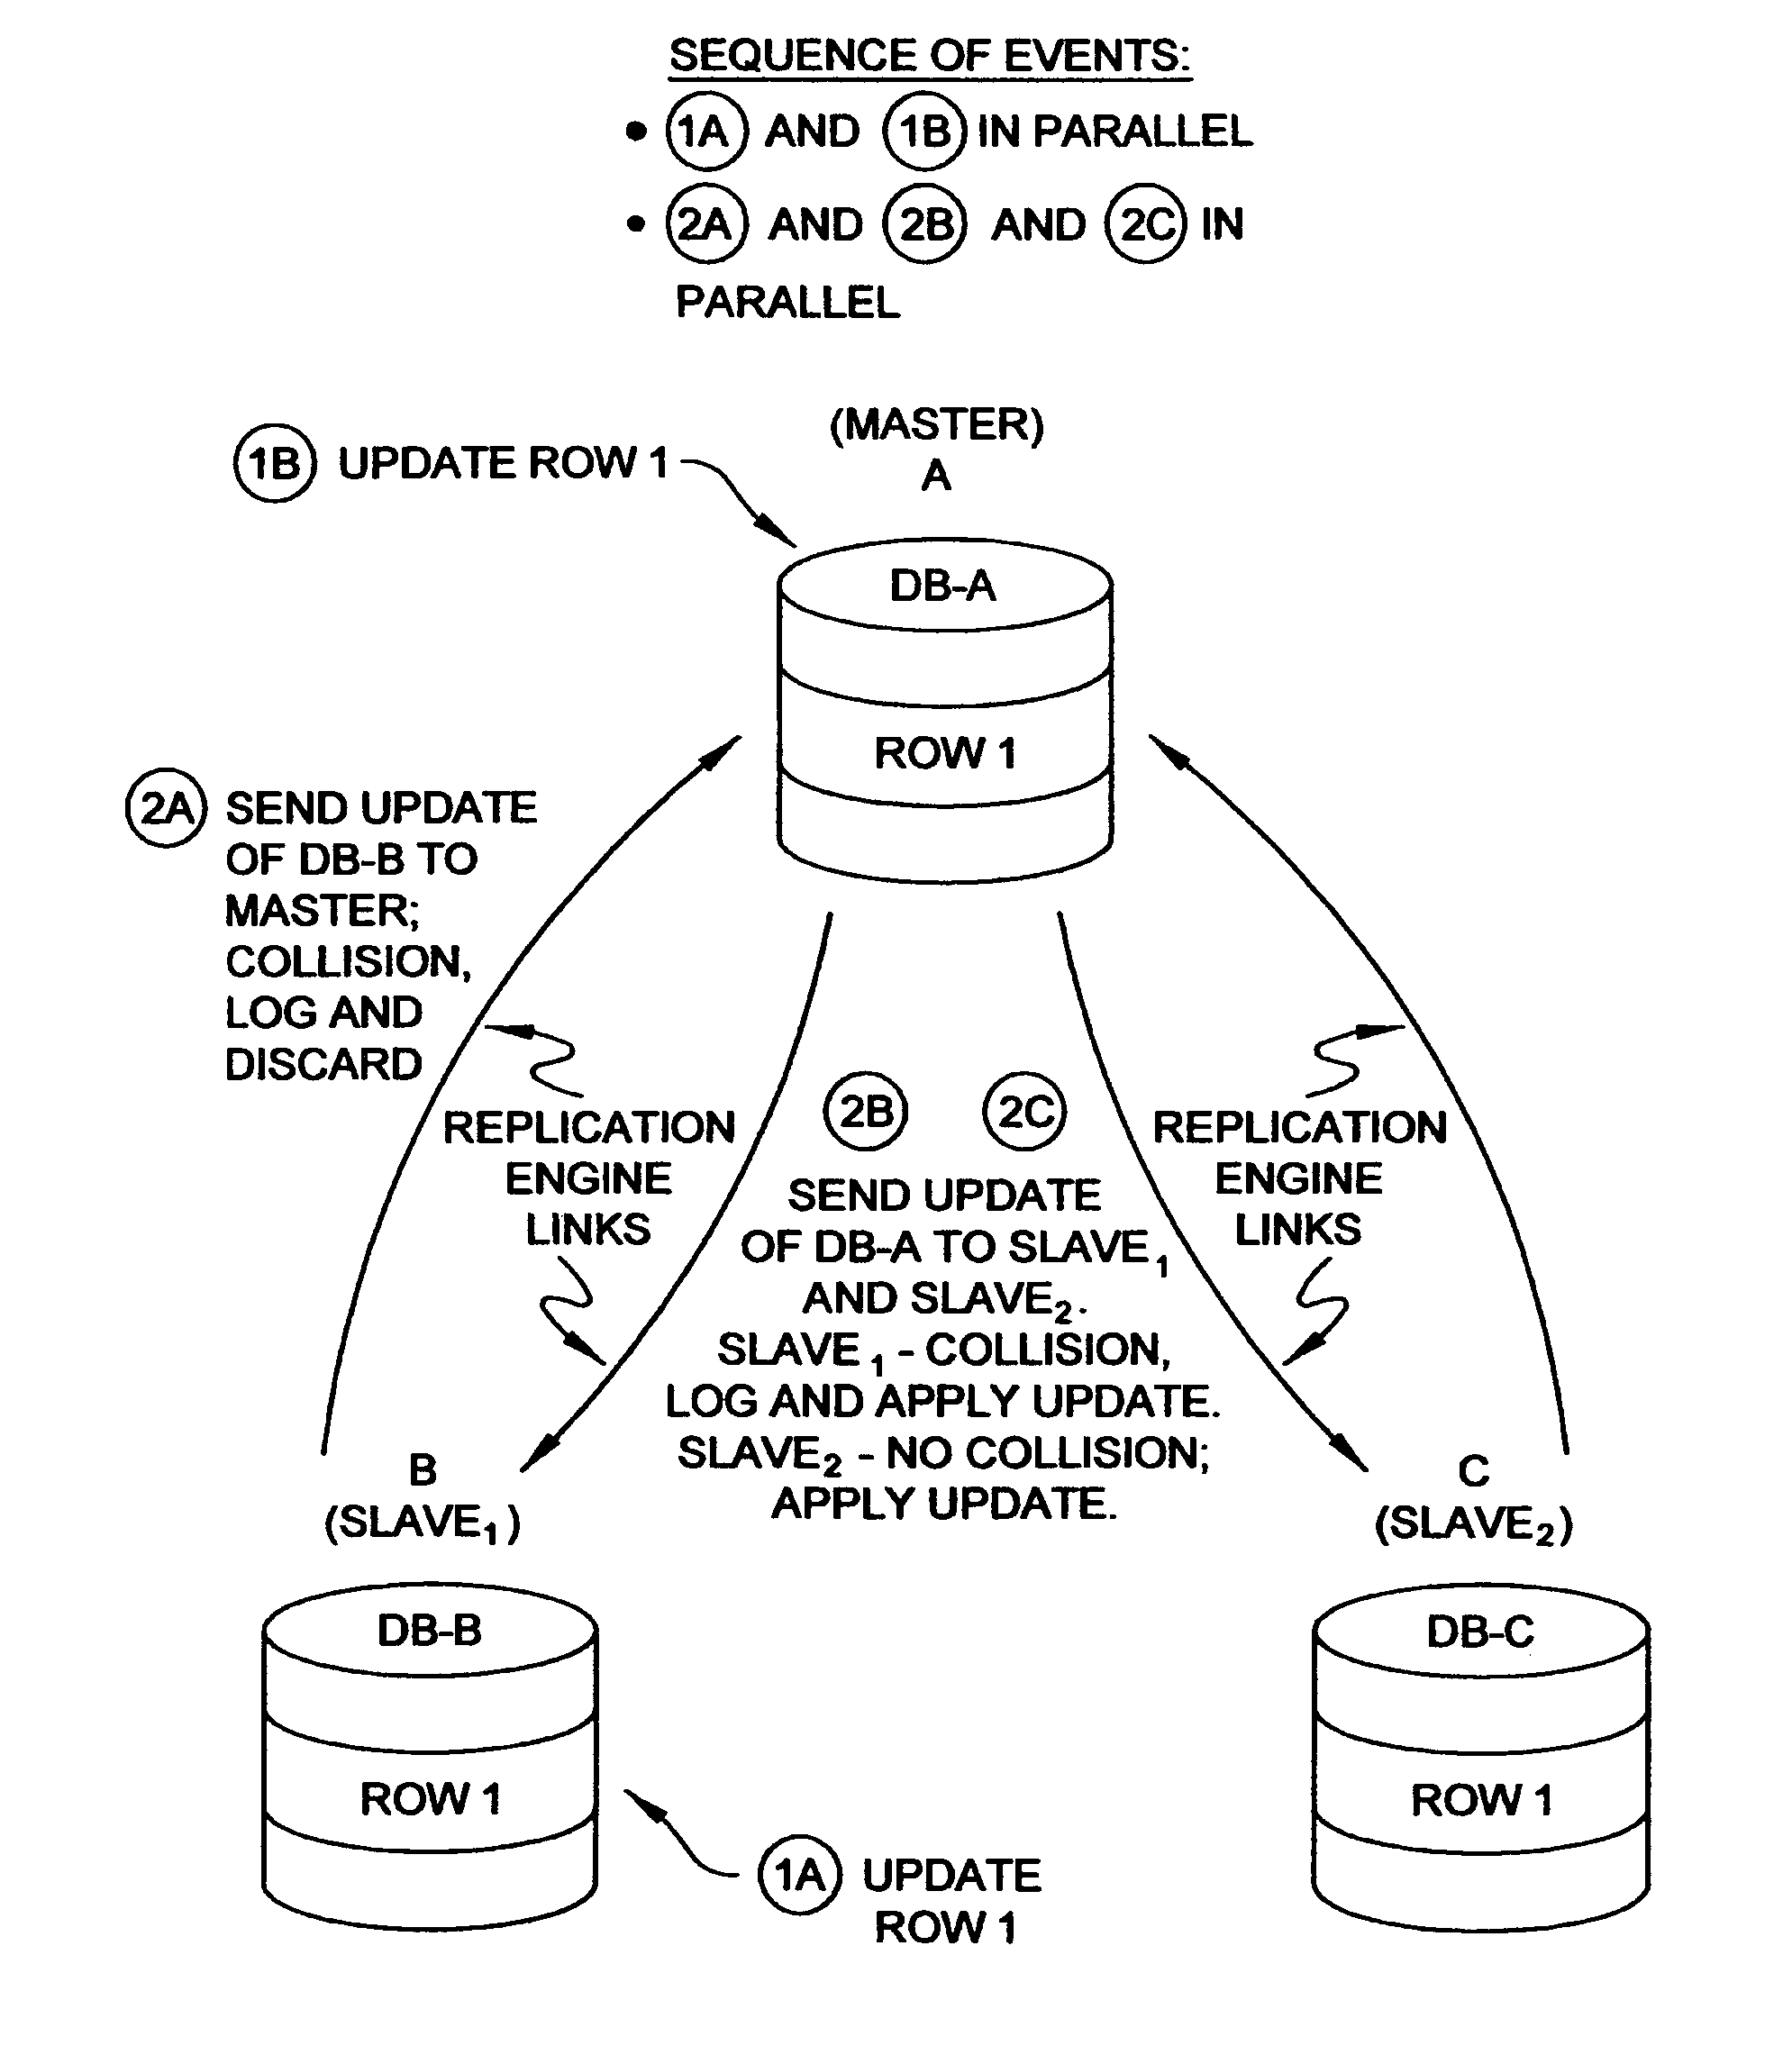 Control of a data replication engine using attributes associated with a transaction